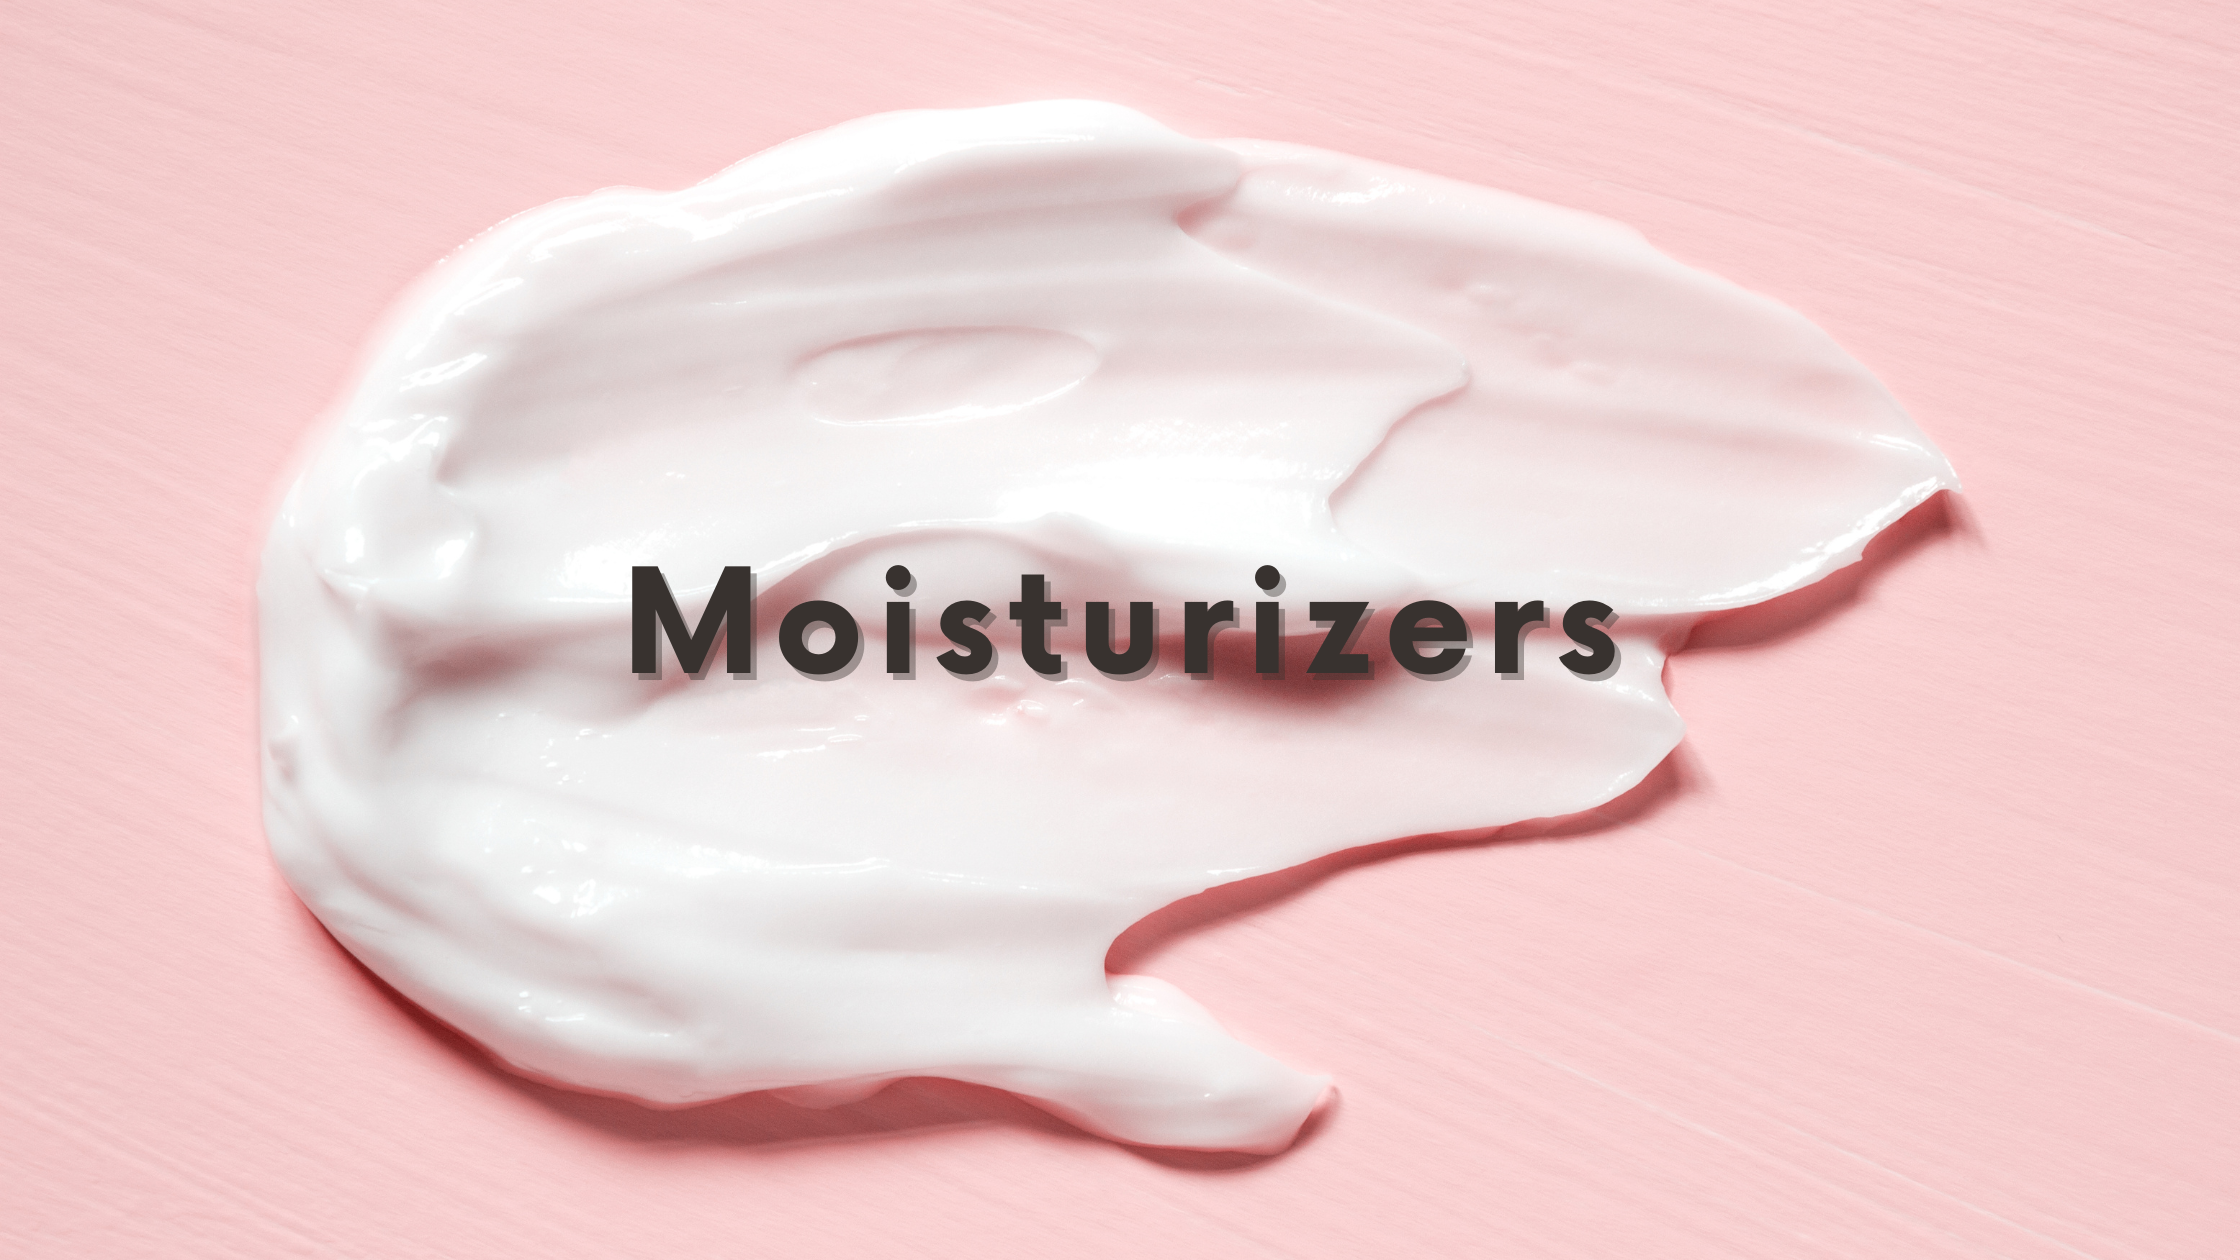 DSC Moisturizers Blog Graphic with black text Moisturizers centered over smear of white lotion on pink background